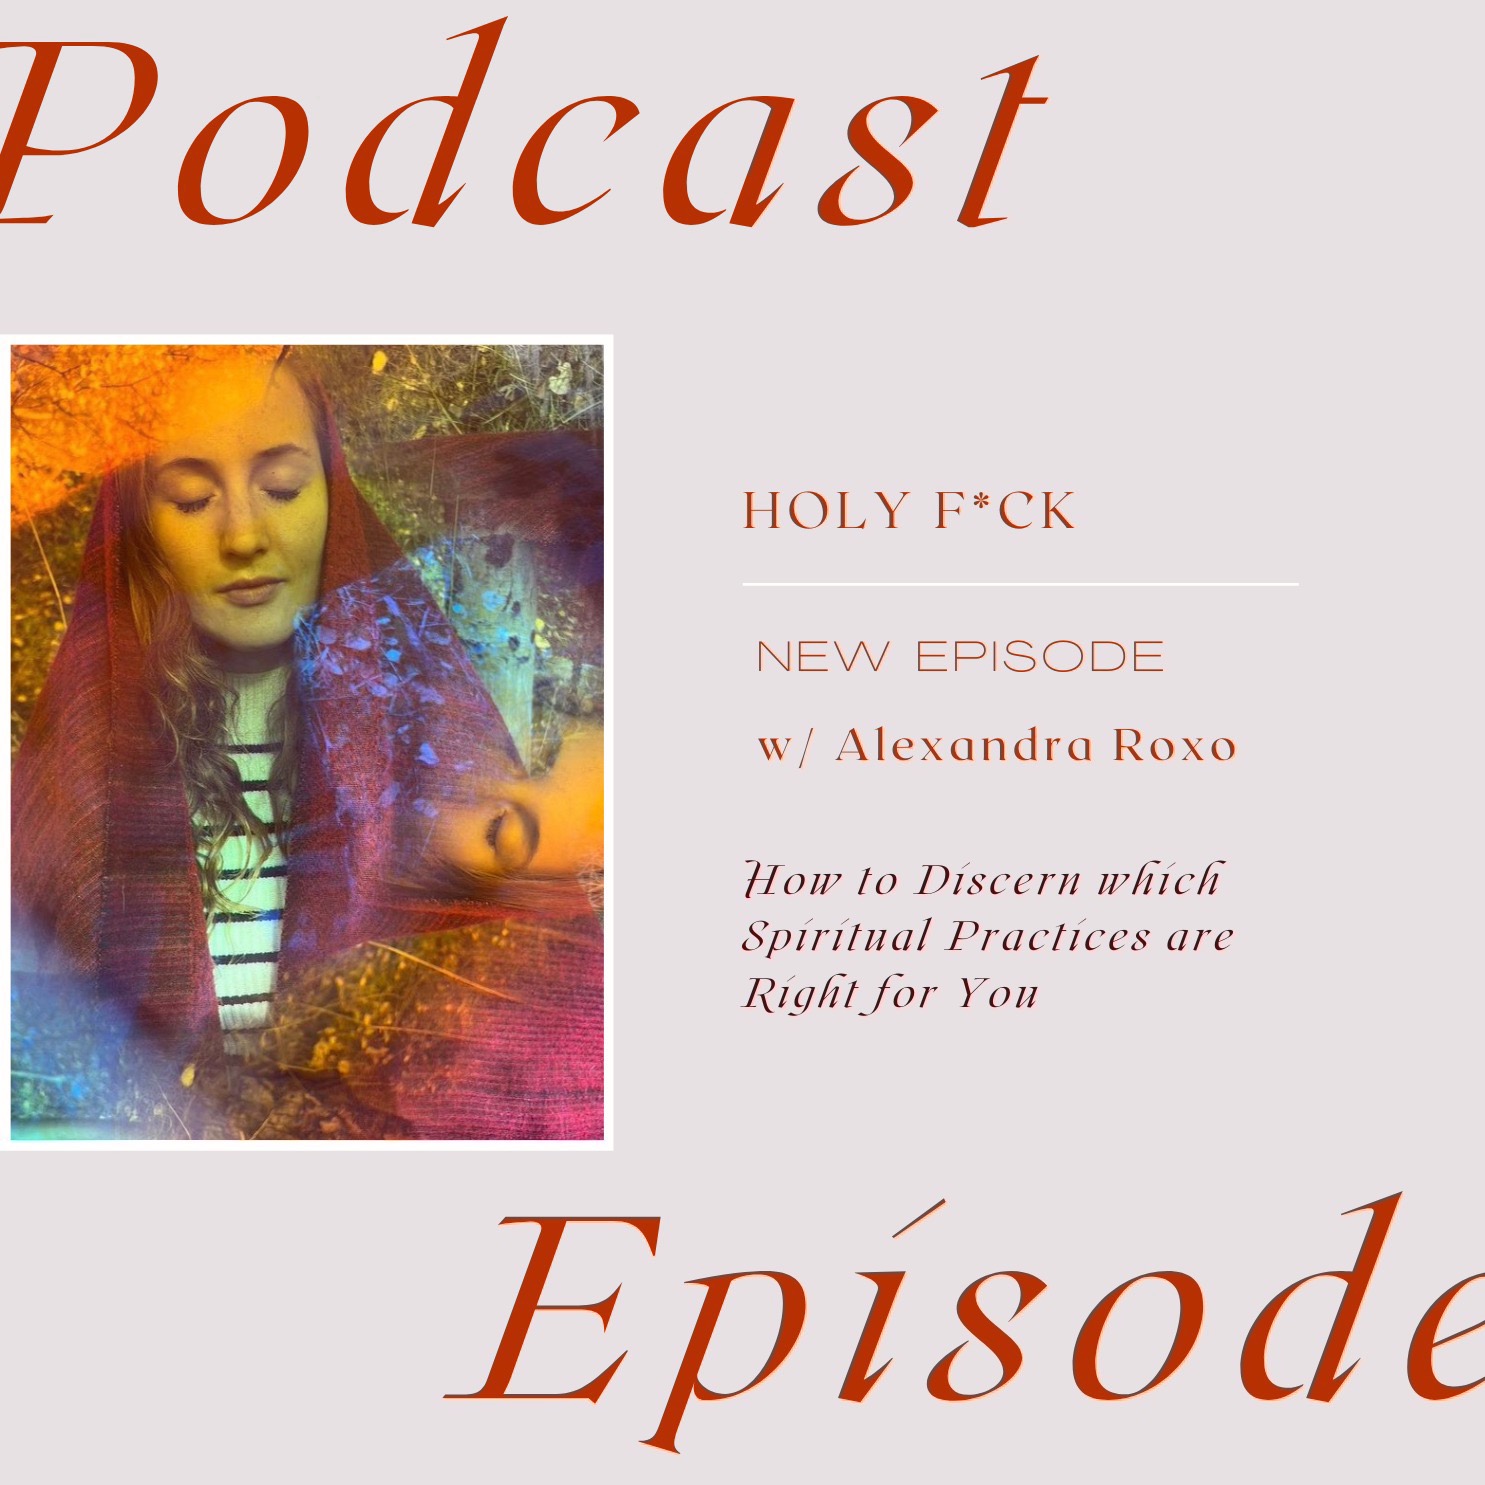 How to Discern which Spiritual Practices are Right for You with Alexandra Roxo